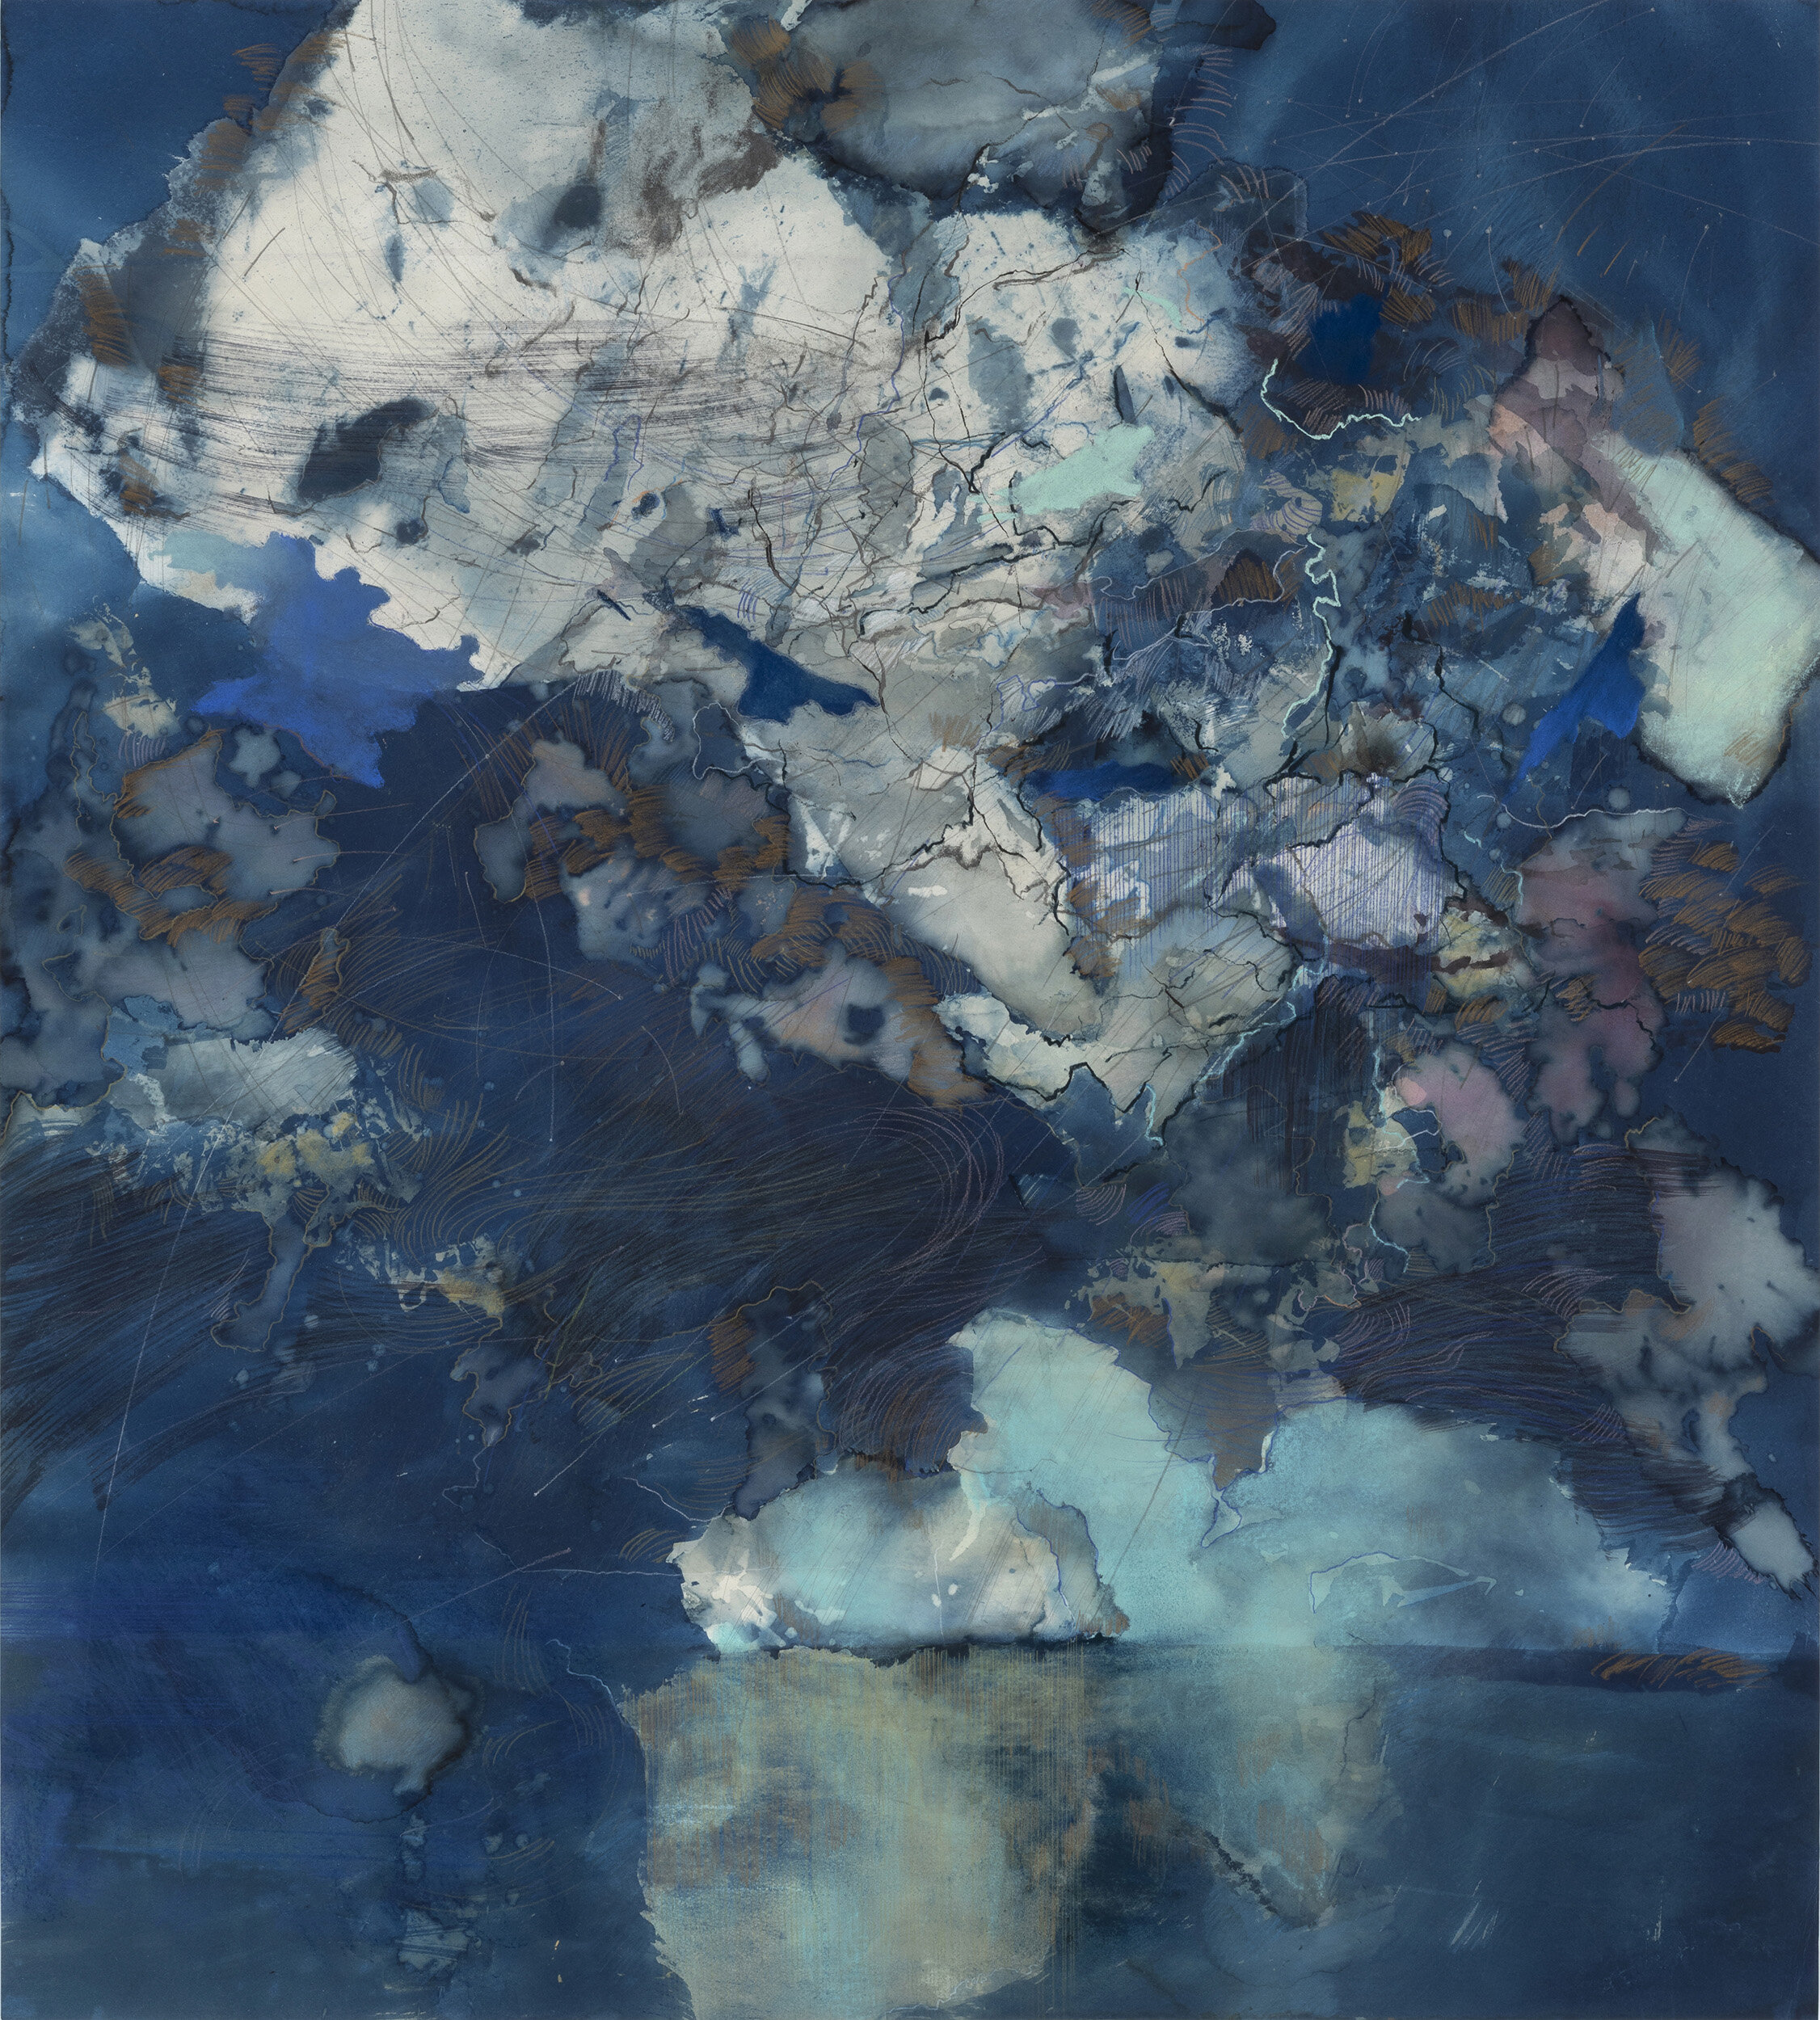  Ocean Narratives  2021, 33 x 30”, cyanotype, sodium bicarbonate, and mixed media on paper  Private Collection 